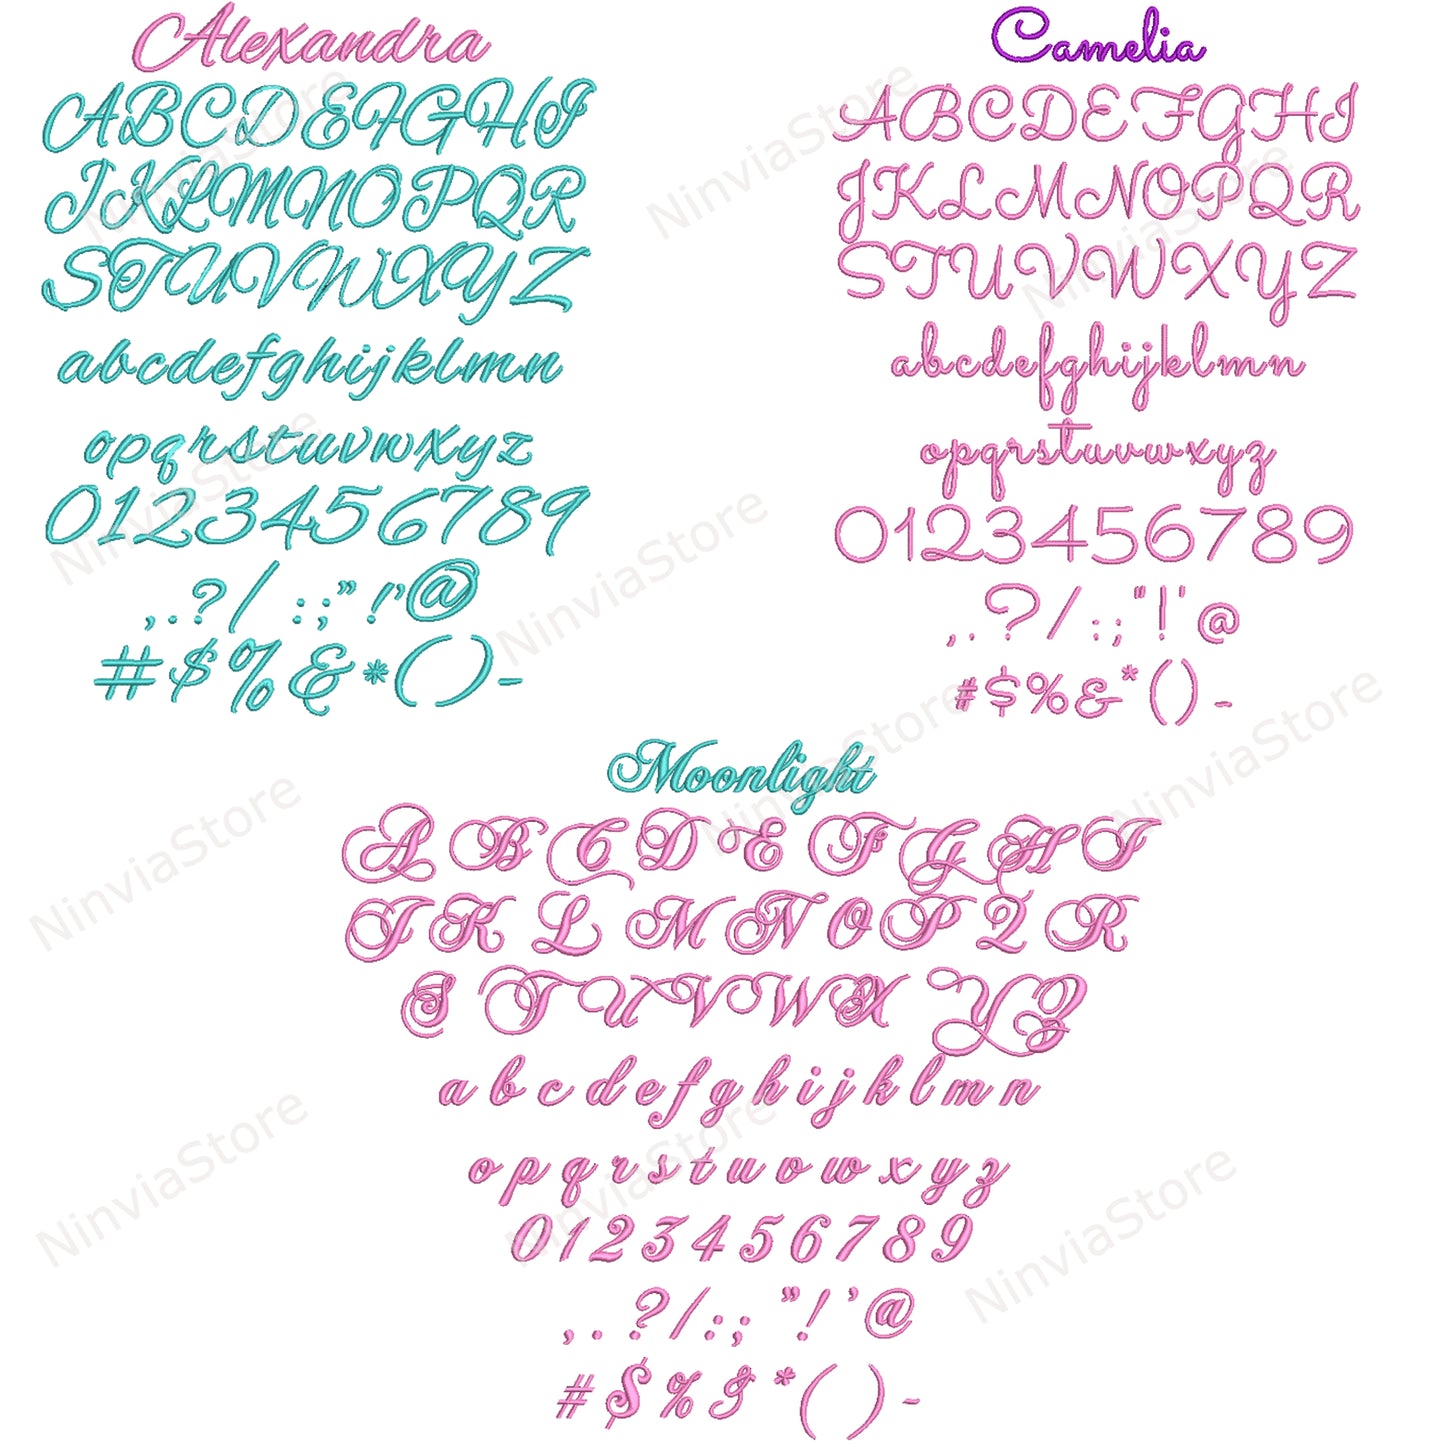 30 BX Embroidery Fonts 0.75", 1.25" and 1.75" Sizes, Machine Embroidery Font BX, Alphabet Embroidery Design, BX fonts for Embroidery